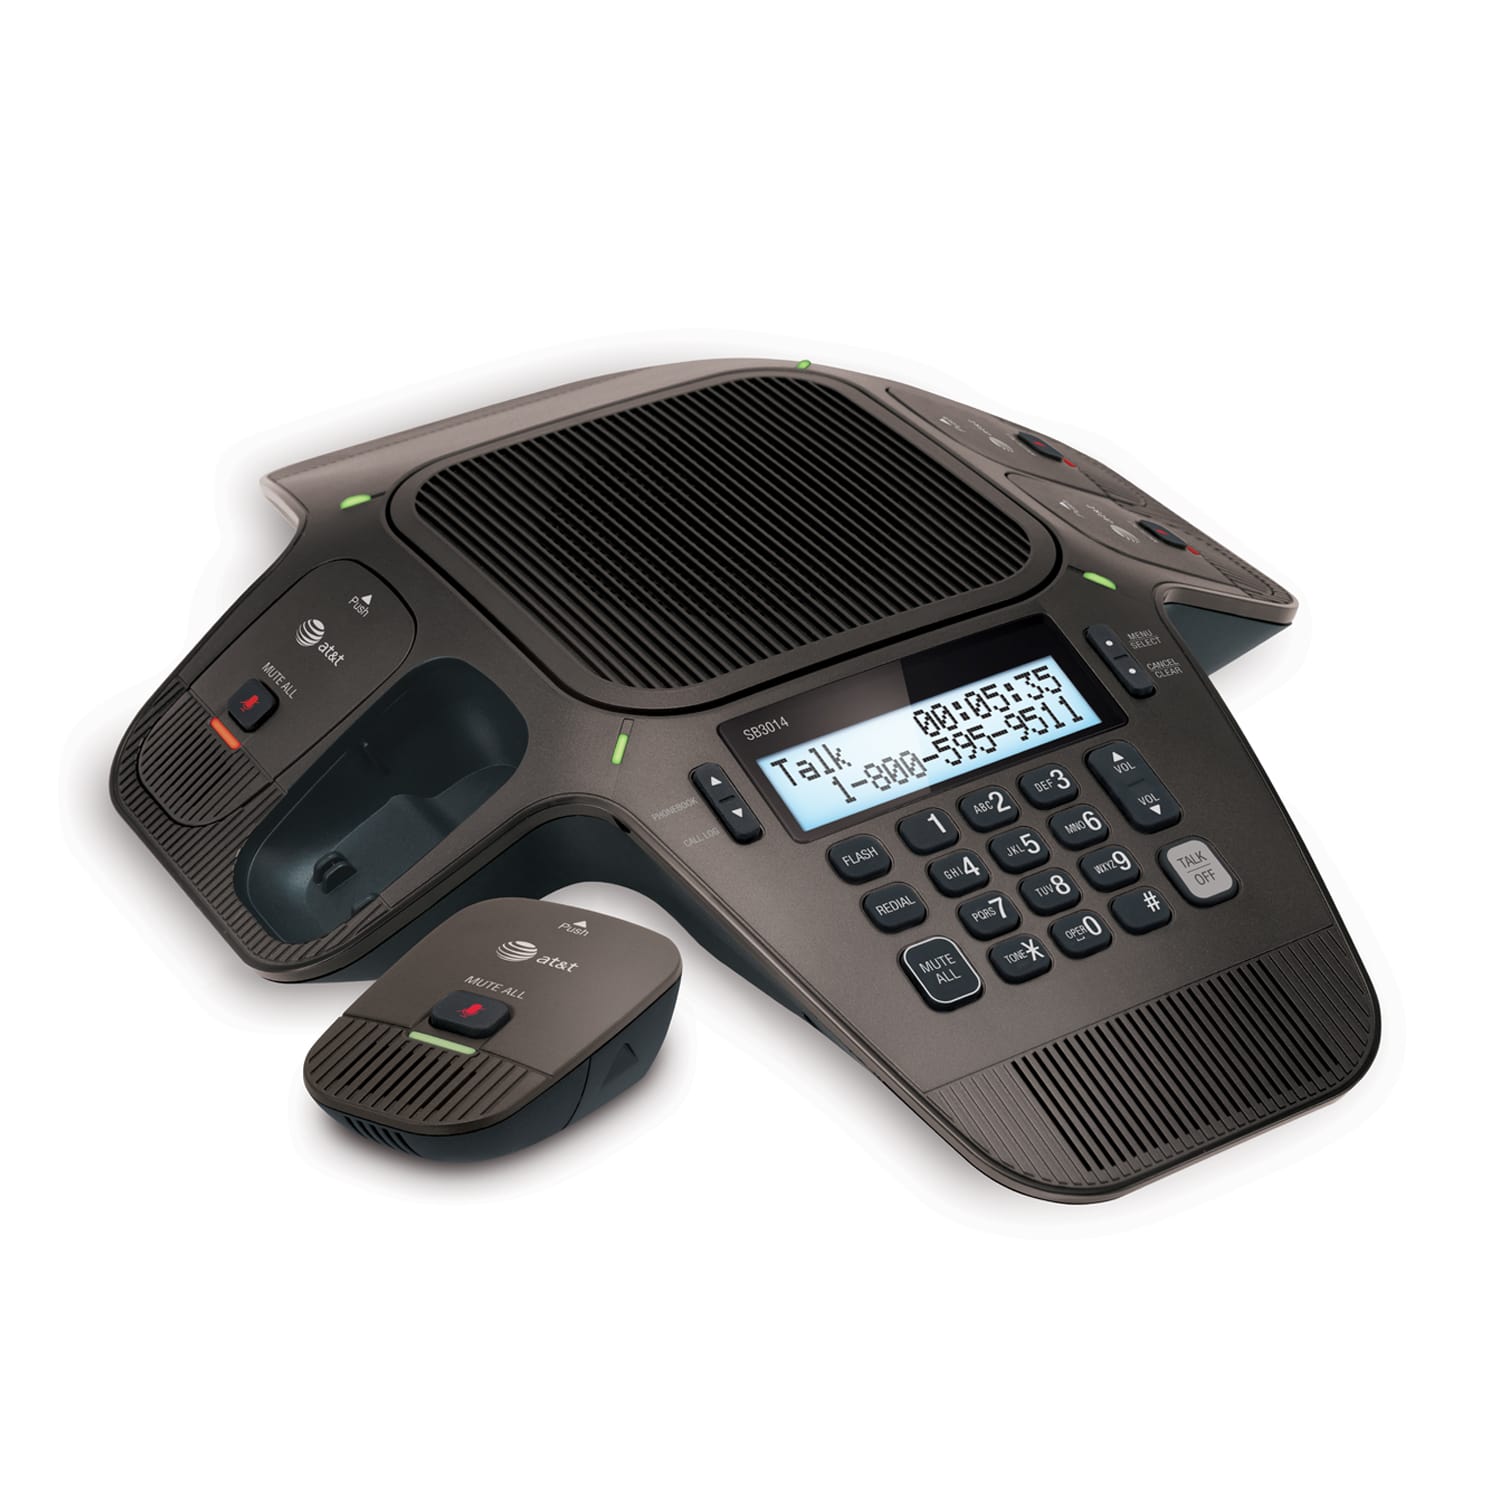 Conference speakerphone with wireless mics - view 1